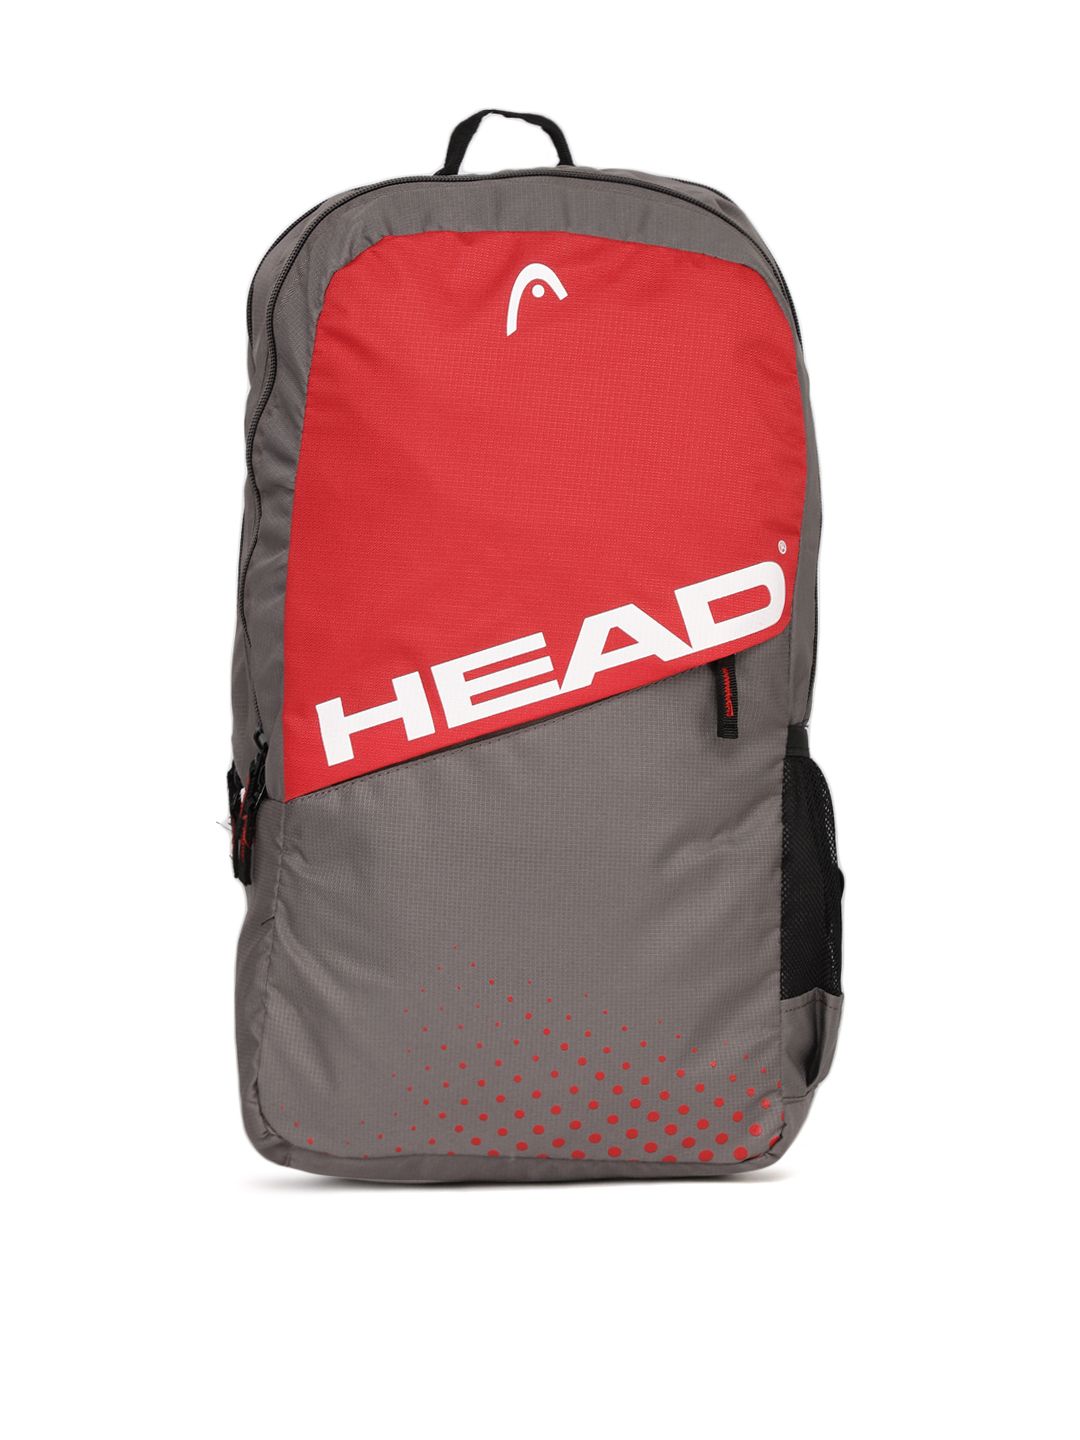 Head Unisex Grey & Red Colourblocked Spin Backpack Price in India